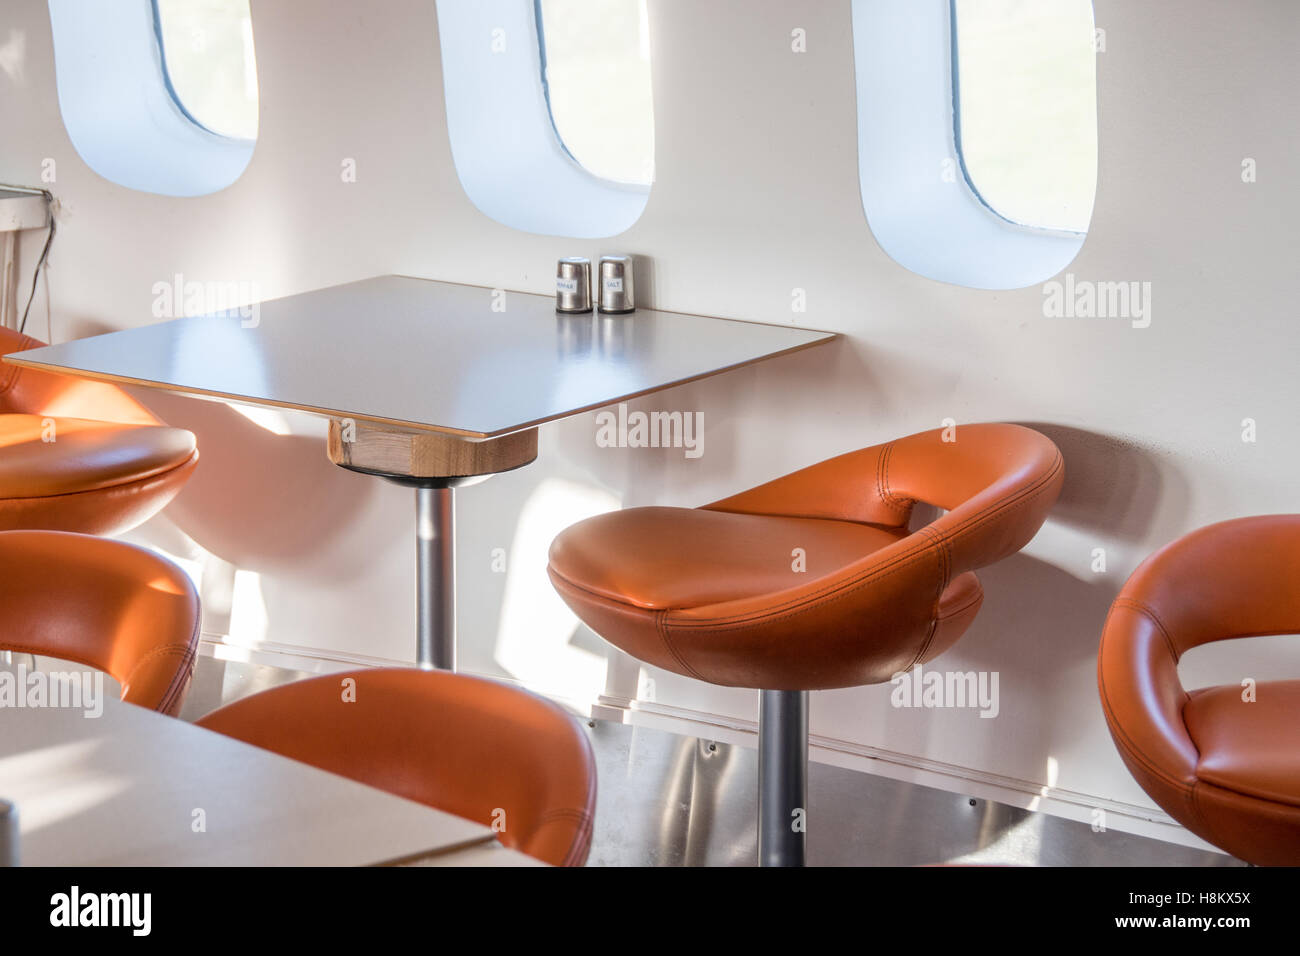 Stockholm, Arlanda, Sweden - The lounge area inside the Jumbo Stay (Jumbohostel), a hostel that is a converted Boeing 747 airlin Stock Photo